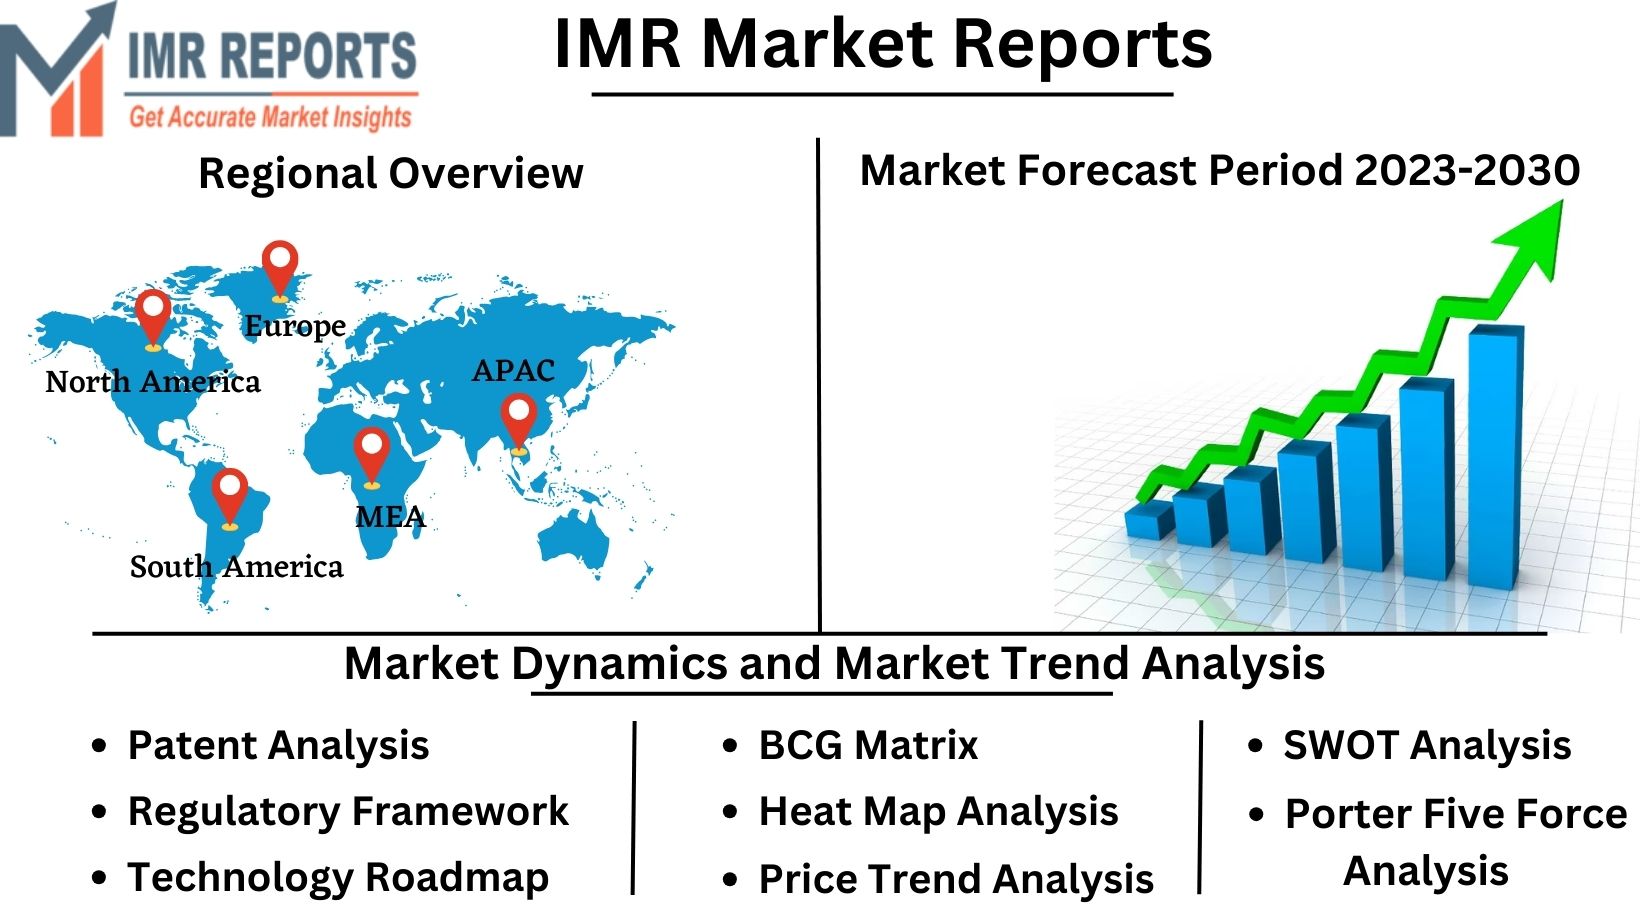 IMR_Market_Reports_(1)19